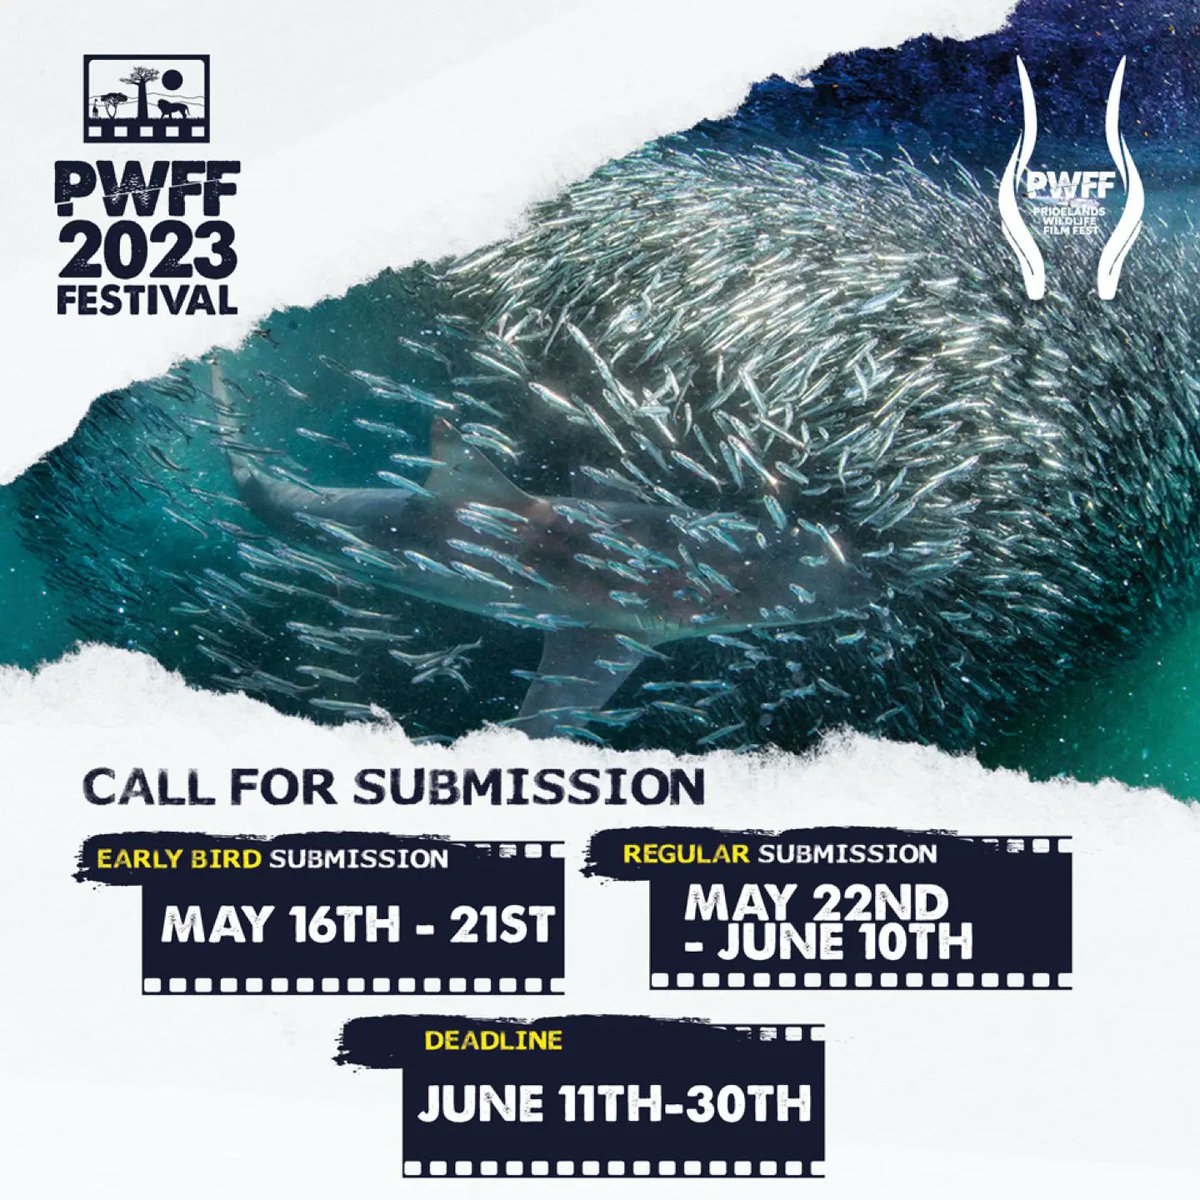 Guess what? WE'RE READY TO SEE YOUR FILMS!🎬
See the link below to submit today!

filmfreeway.com/PridelandsWild…
#pwff2023 #homeofafricanstorytellers #africarising #africasfirstwildlifefilmfestival #africanstories #wildlifefilmfestival #wildlifefilms #callforsubmissions